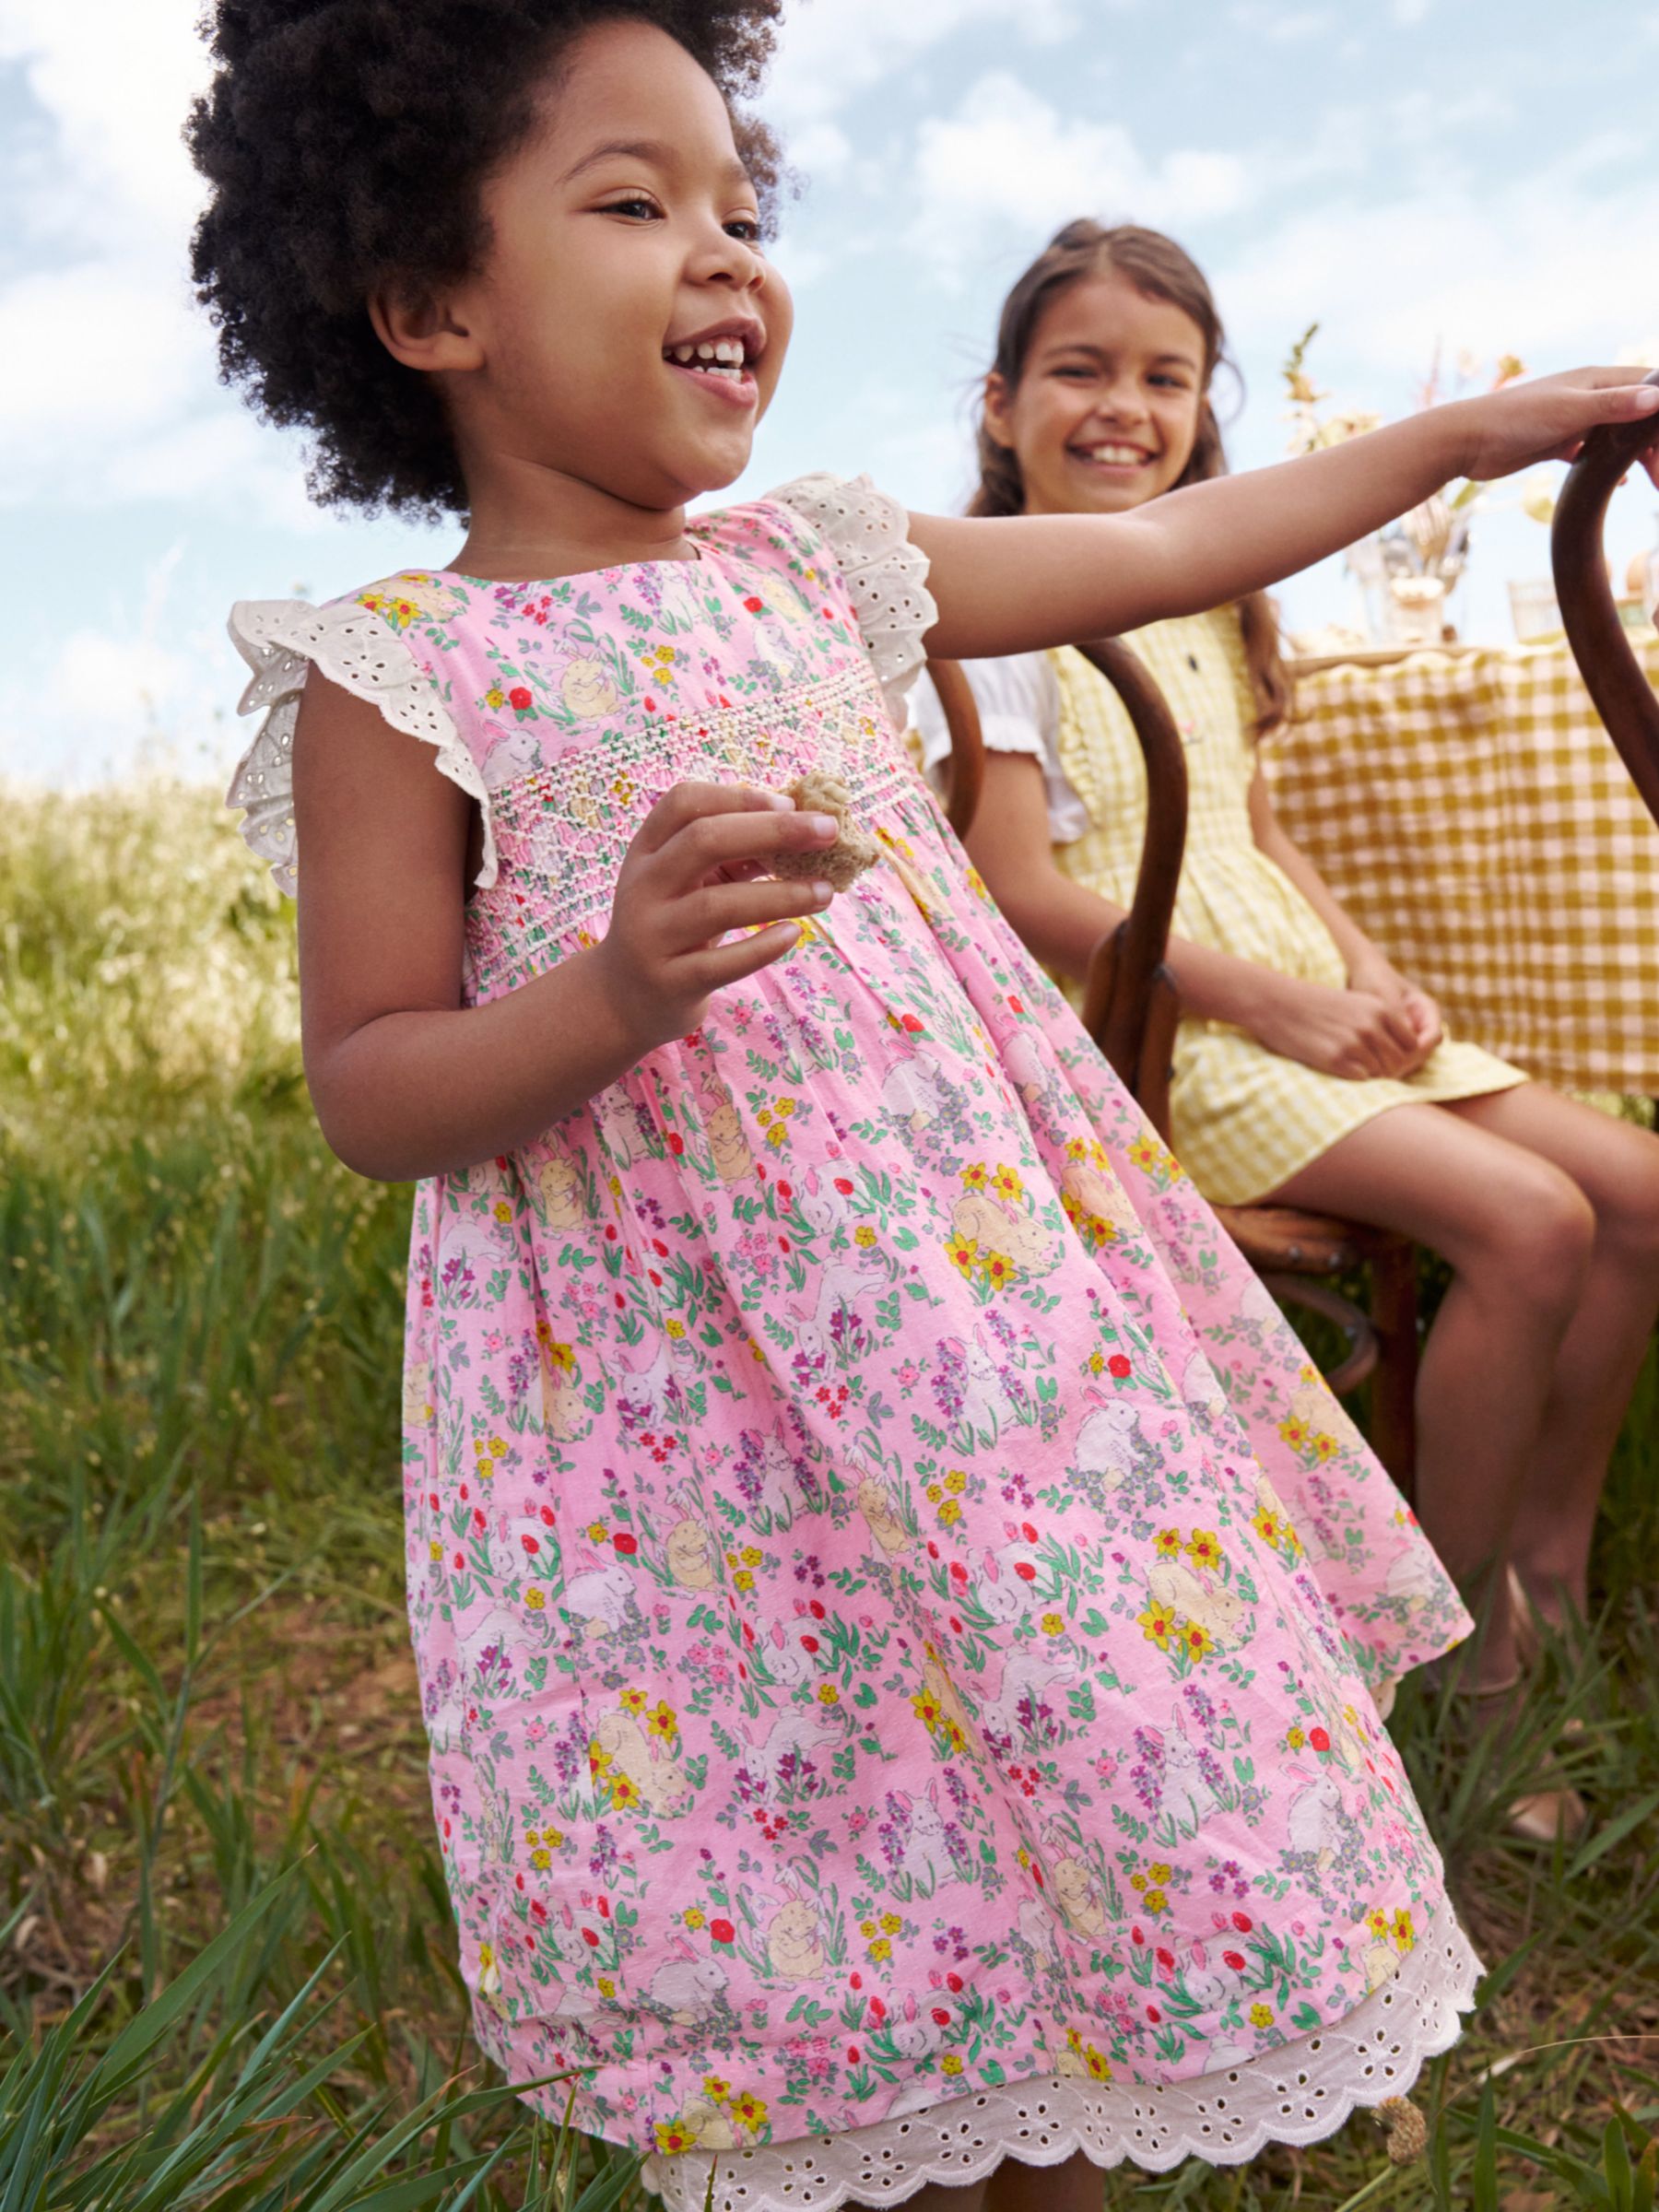 Buy Mini Boden Kids' Bunny Print Smocked Lace Trim Dress, Pea Meadow Online at johnlewis.com